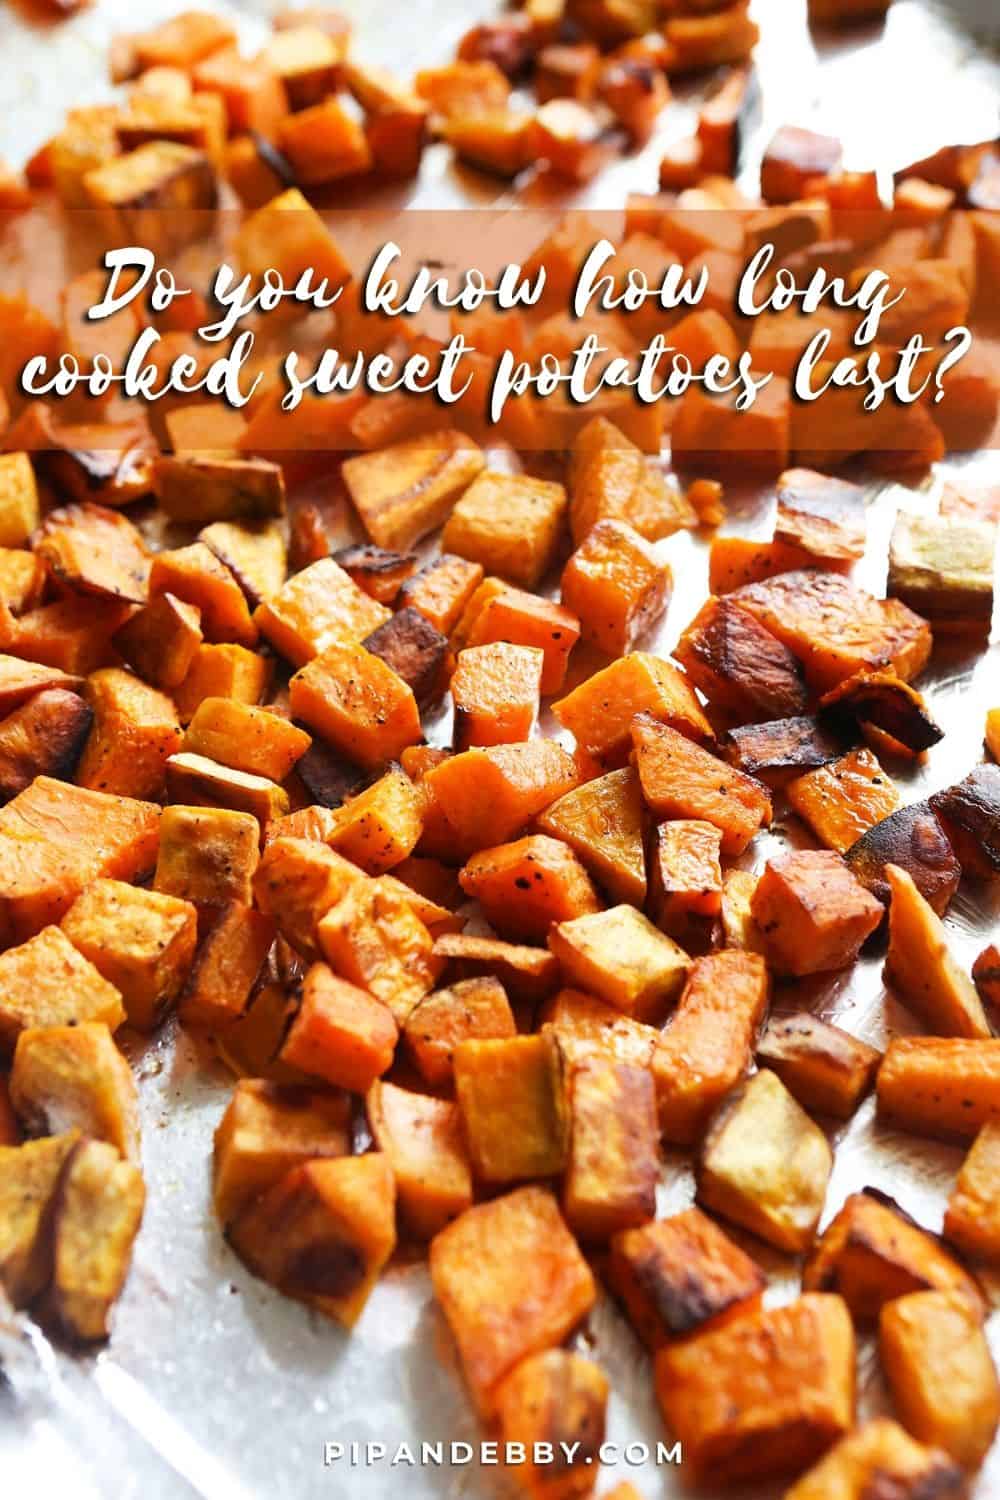 Photo of roasted potatoes with text over the top that reads: "Do you know how long cooked sweet potatoes last?"